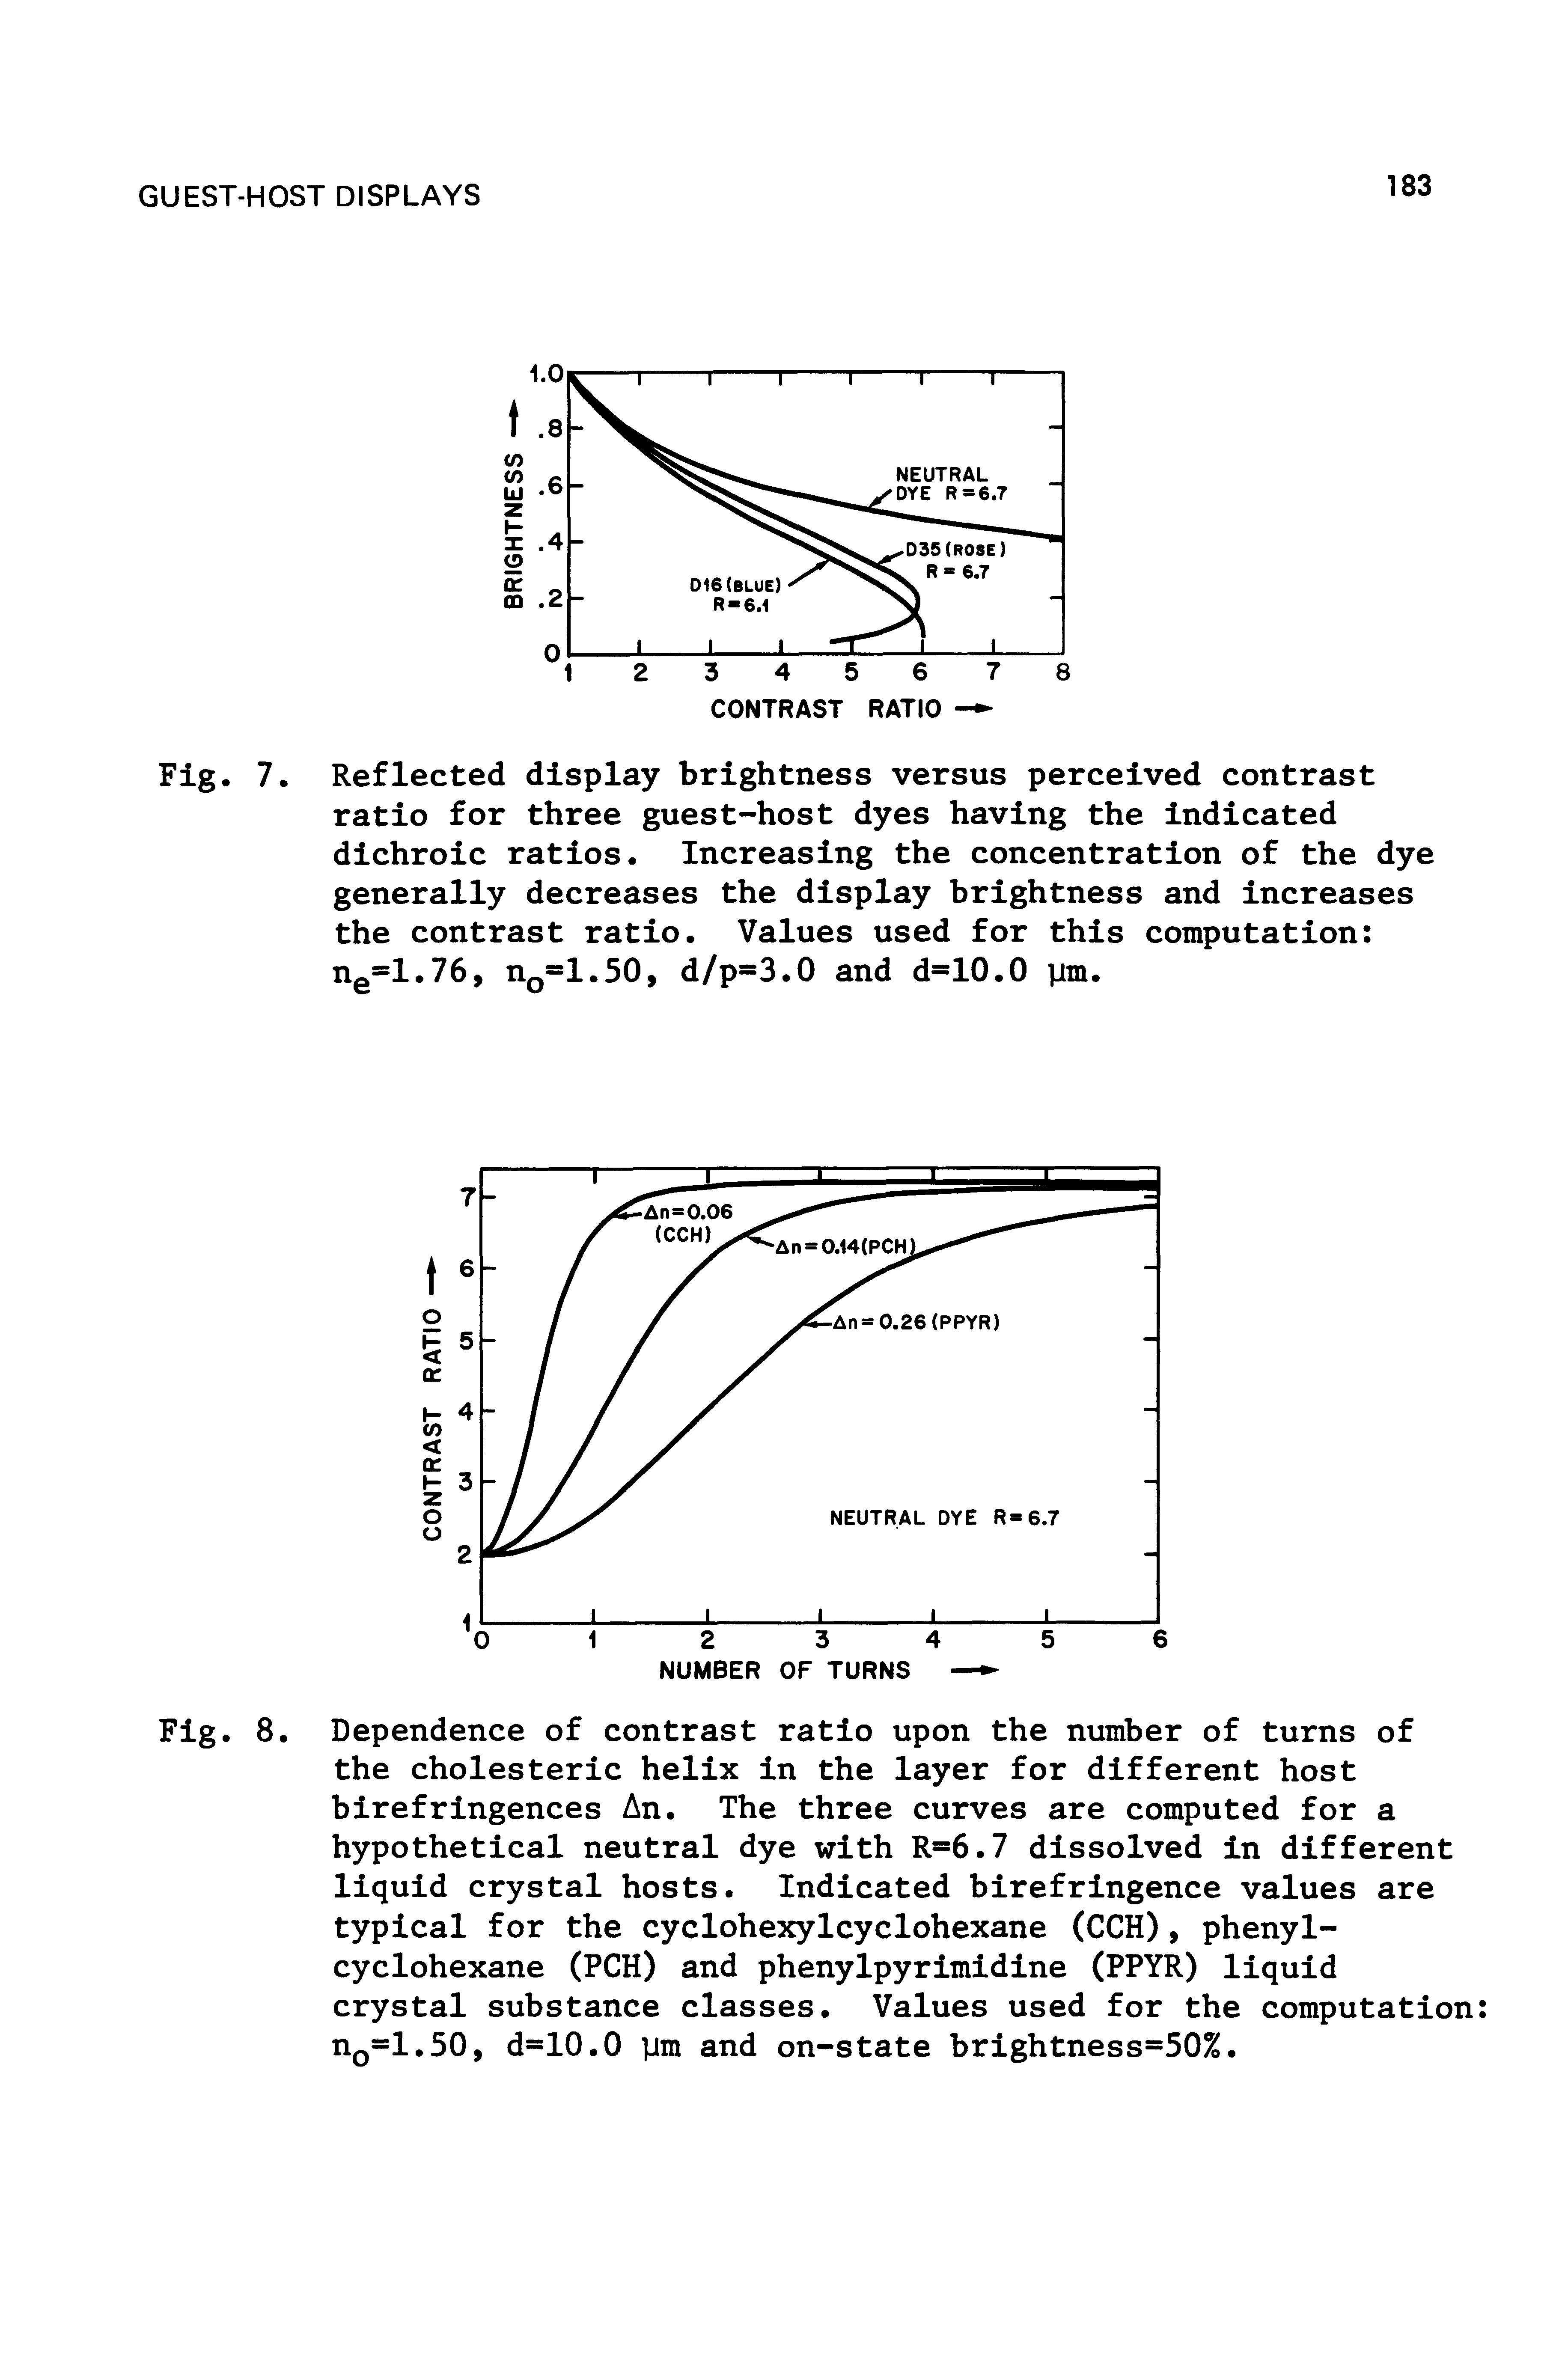 Fig. 8. Dependence of contrast ratio upon the number of turns of the cholesteric helix in the layer for different host birefringences An. The three curves are computed for a hypothetical neutral dye with R=6.7 dissolved in different liquid crystal hosts. Indicated birefringence values are typical for the cyclohexylcyclohexane (CCH), phenyl-cyclohexane (PCH) and phenylpyrimidine (PPYR) liquid crystal substance classes. Values used for the computation nQ=1.50, d=10.0 ym and on-state brightness=50%.